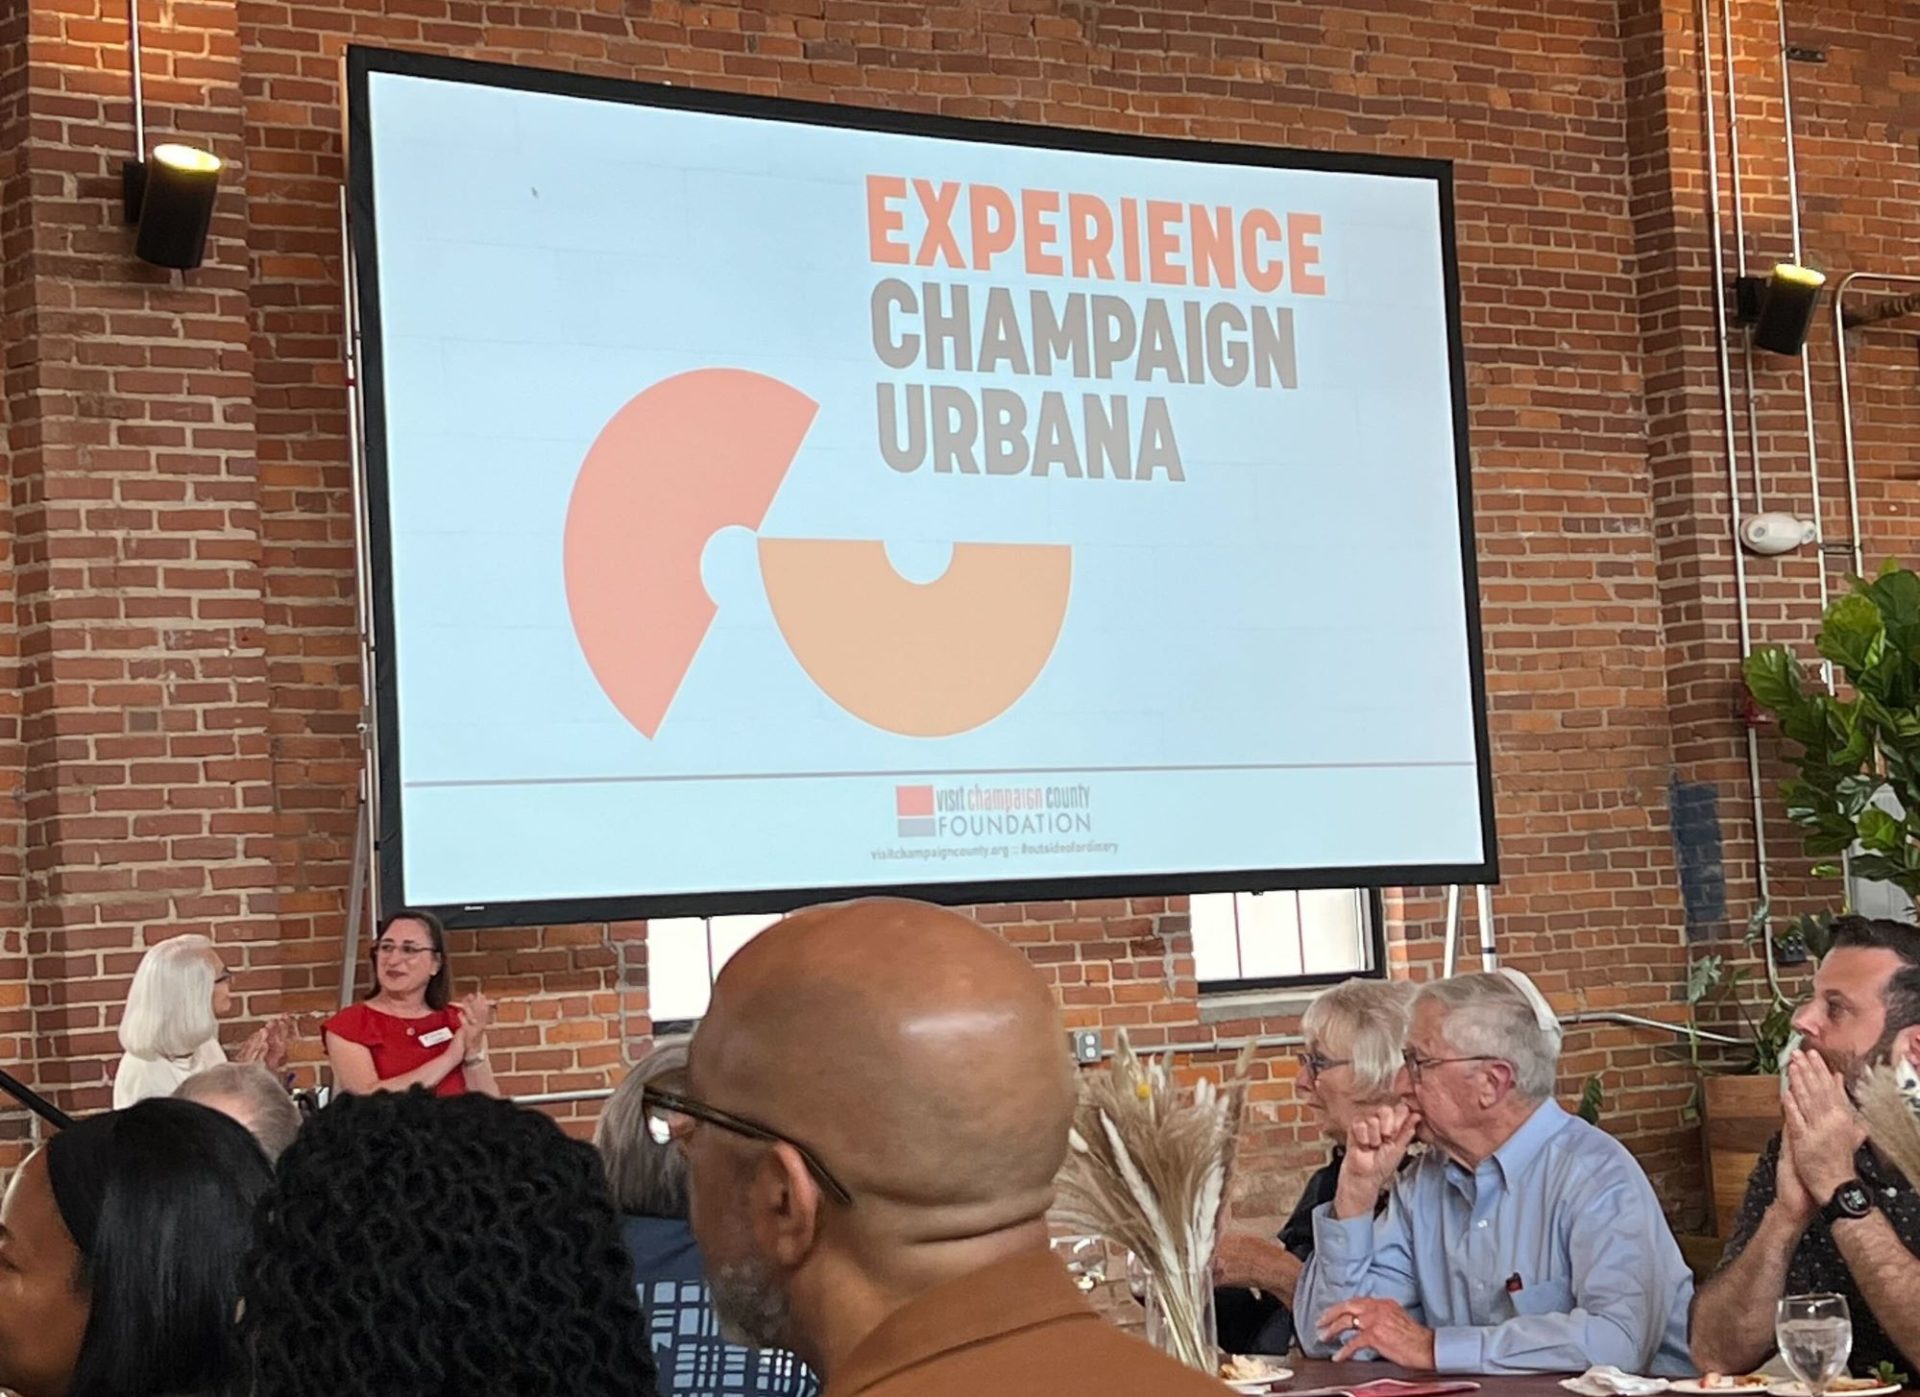 A large screen attached to a brick wall. It has a white background, and is displaying two orange semi circles and Experience Champaign Urbana in block lettering.